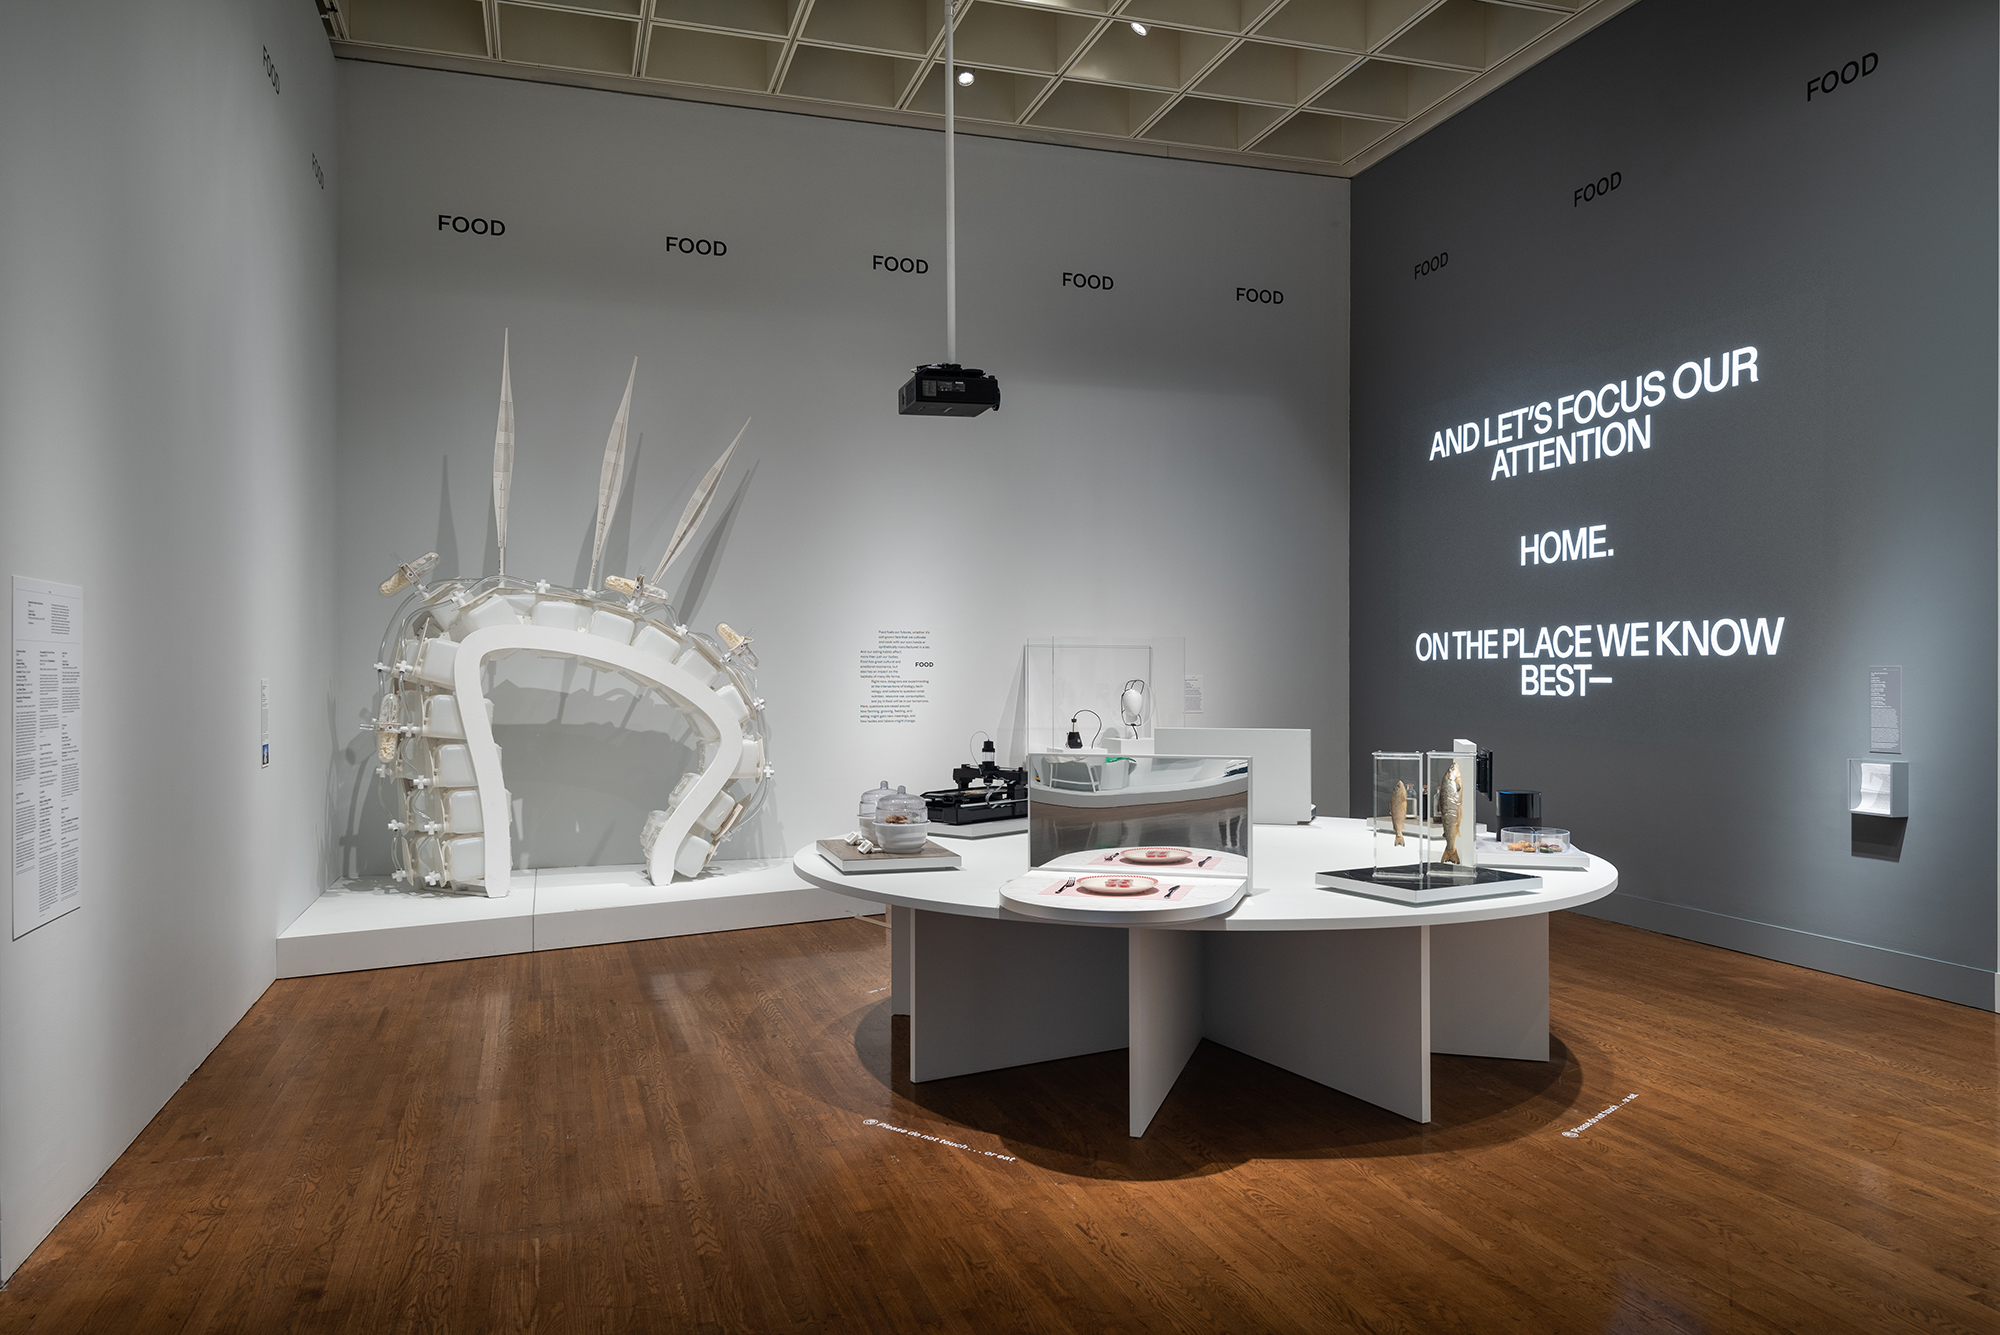 Exhibit at Designs for Different Futures, a white table with futuristic table settings, a white structure, on the wall is the text "And let's focus our attention—Home—On the place we know best.”